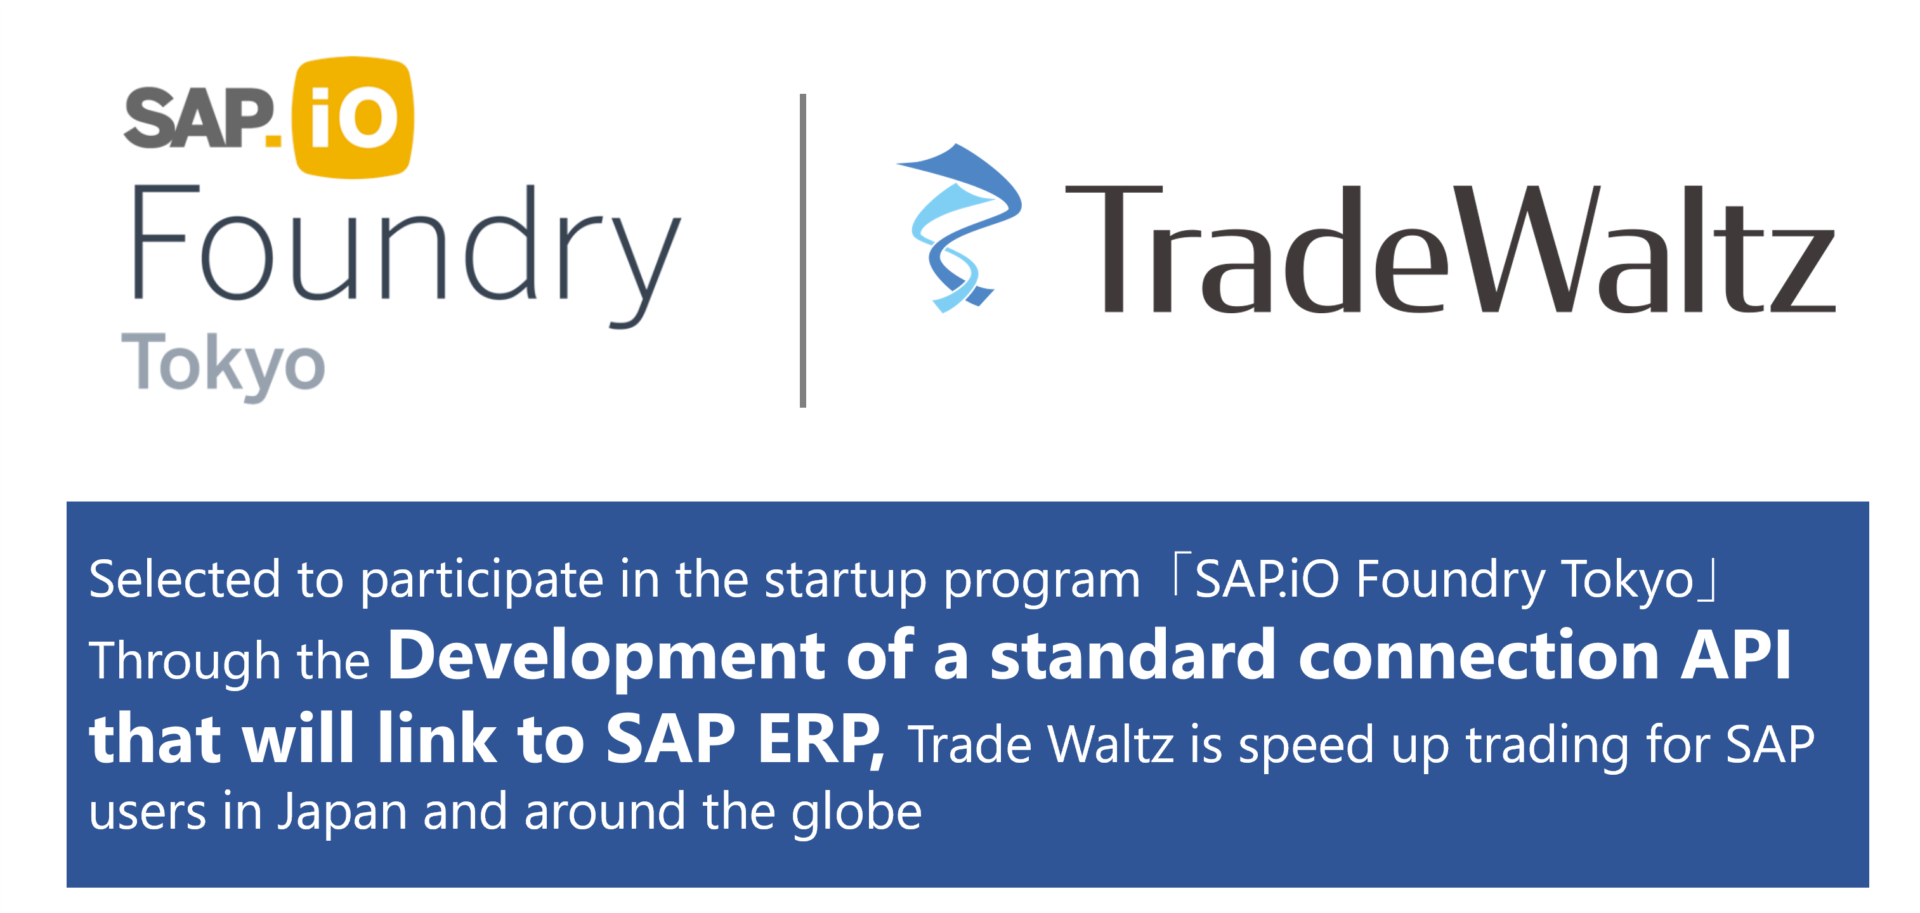 TradeWaltz Inc, Which Promotes the Digitalization of Trade, Has Been Selected for the “SAP.iO Foundry Tokyo” Program. Standard Connection API Development to Link with SAP Will Begin.